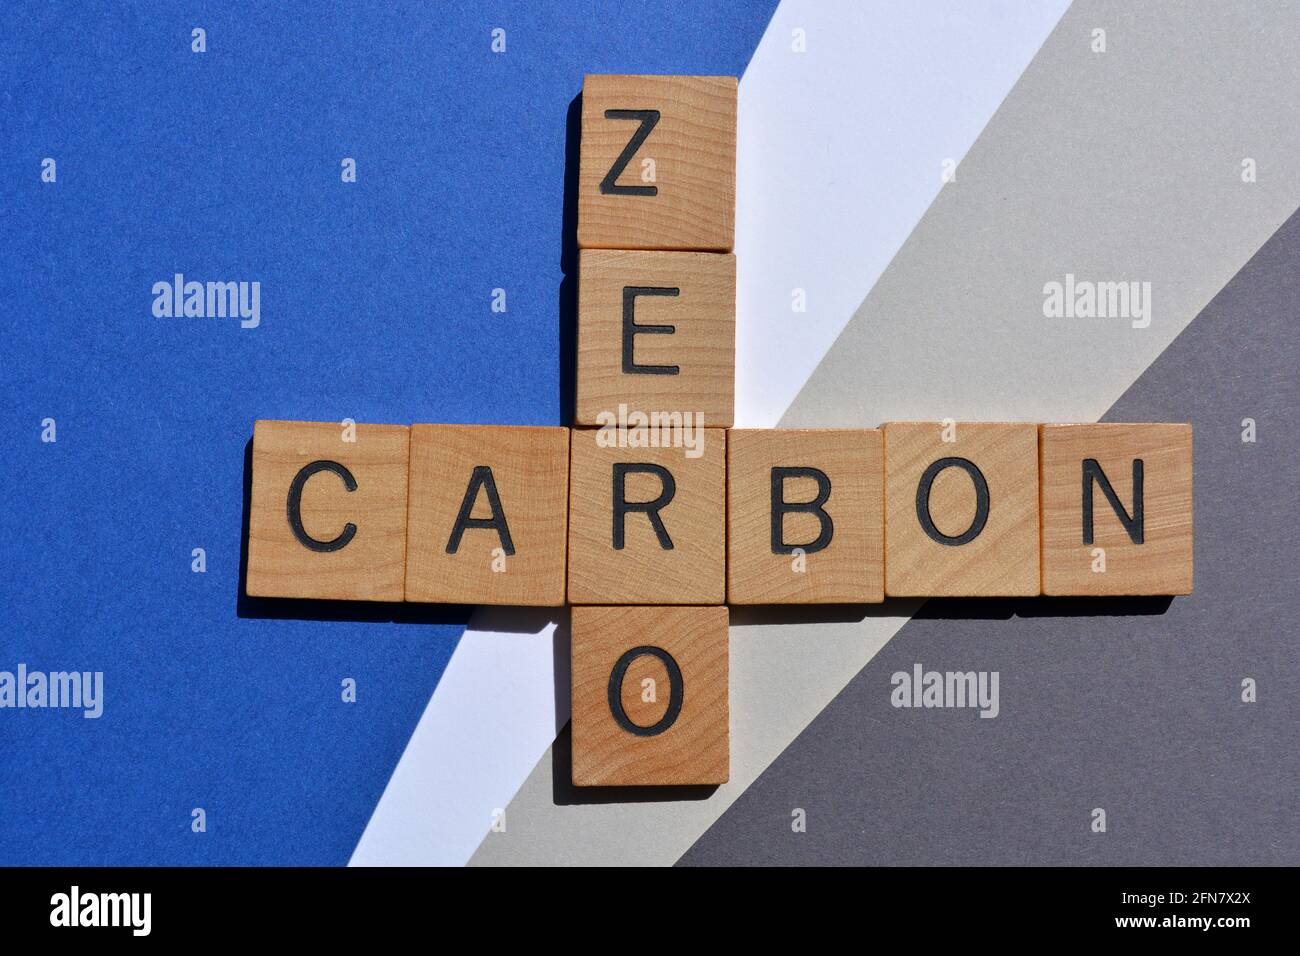 Zero, Carbon, words in wooden alphabet letters in crossword form isolated on blue and grey background Stock Photo